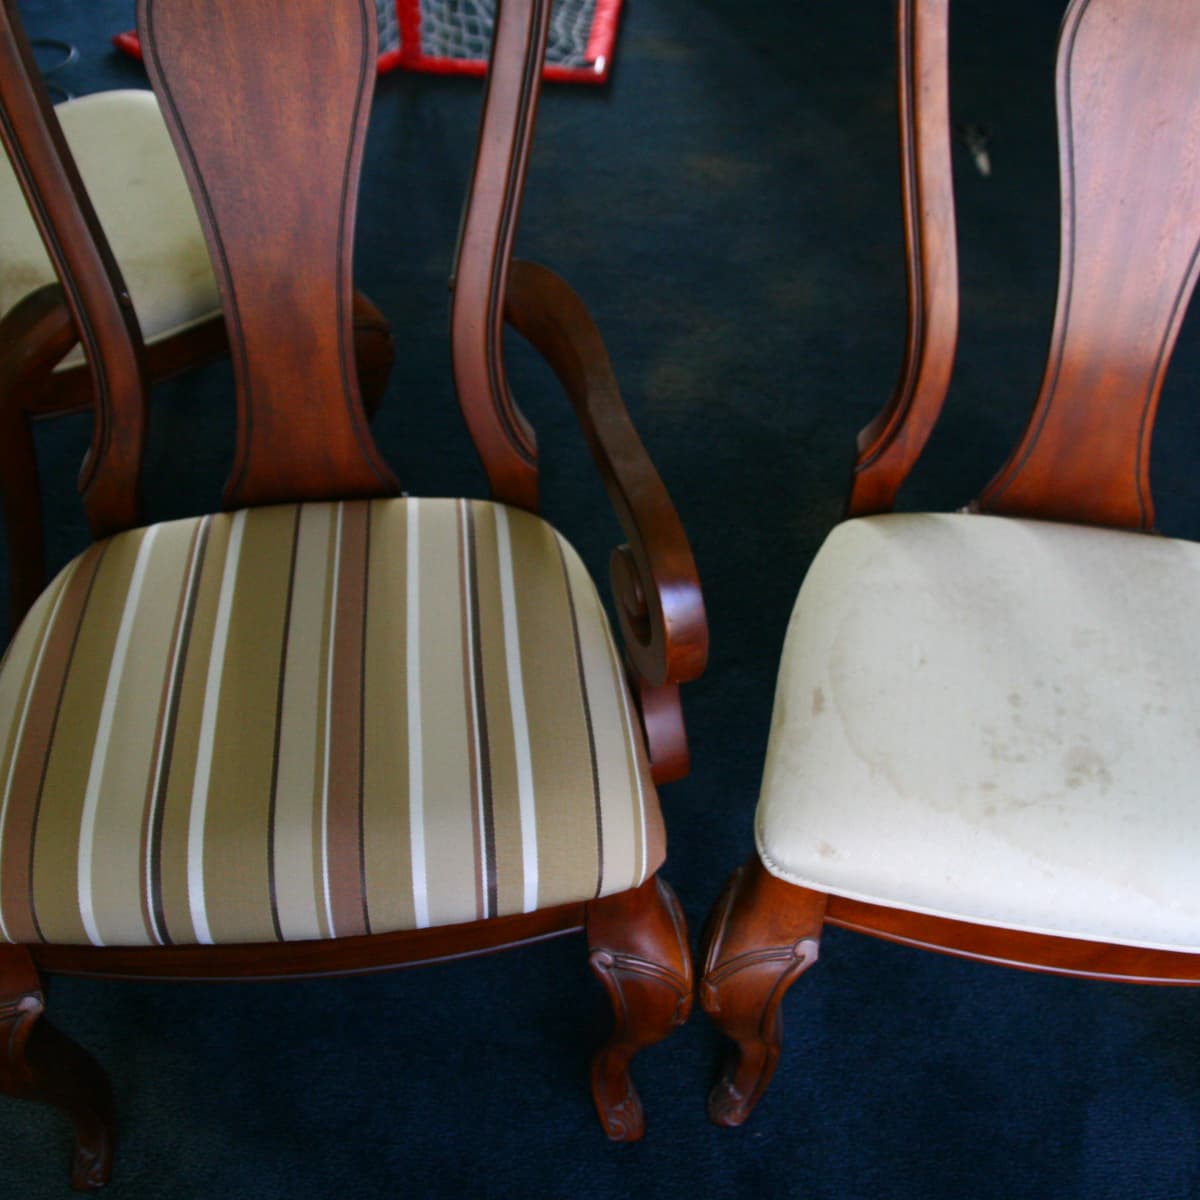 How To Reupholster A Dining Room Chair, Reupholster Leather Chair Cost